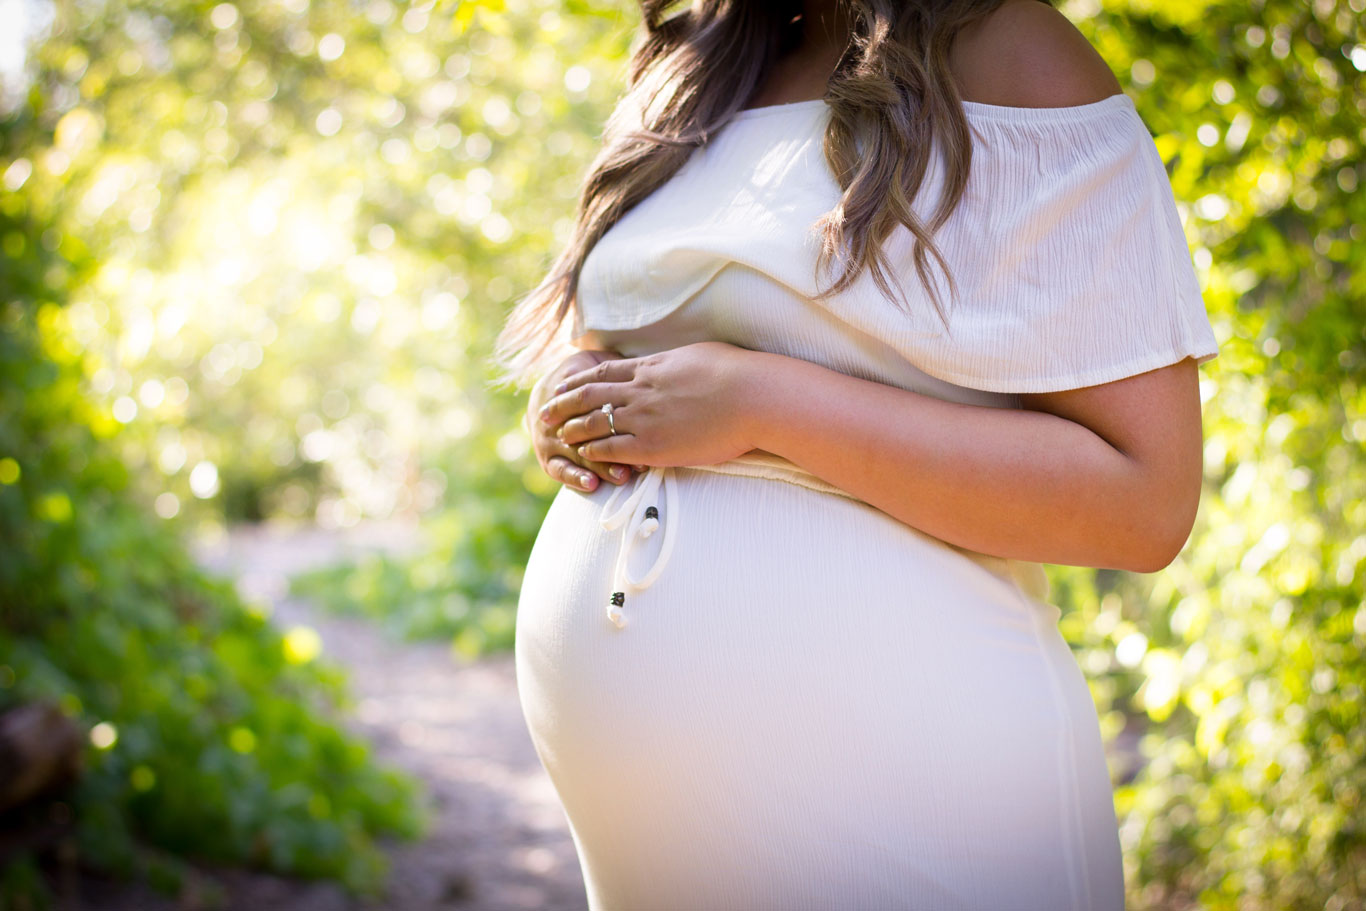 theAsianparent-MoEngage partnership helps mothers experience healthy pregnancies